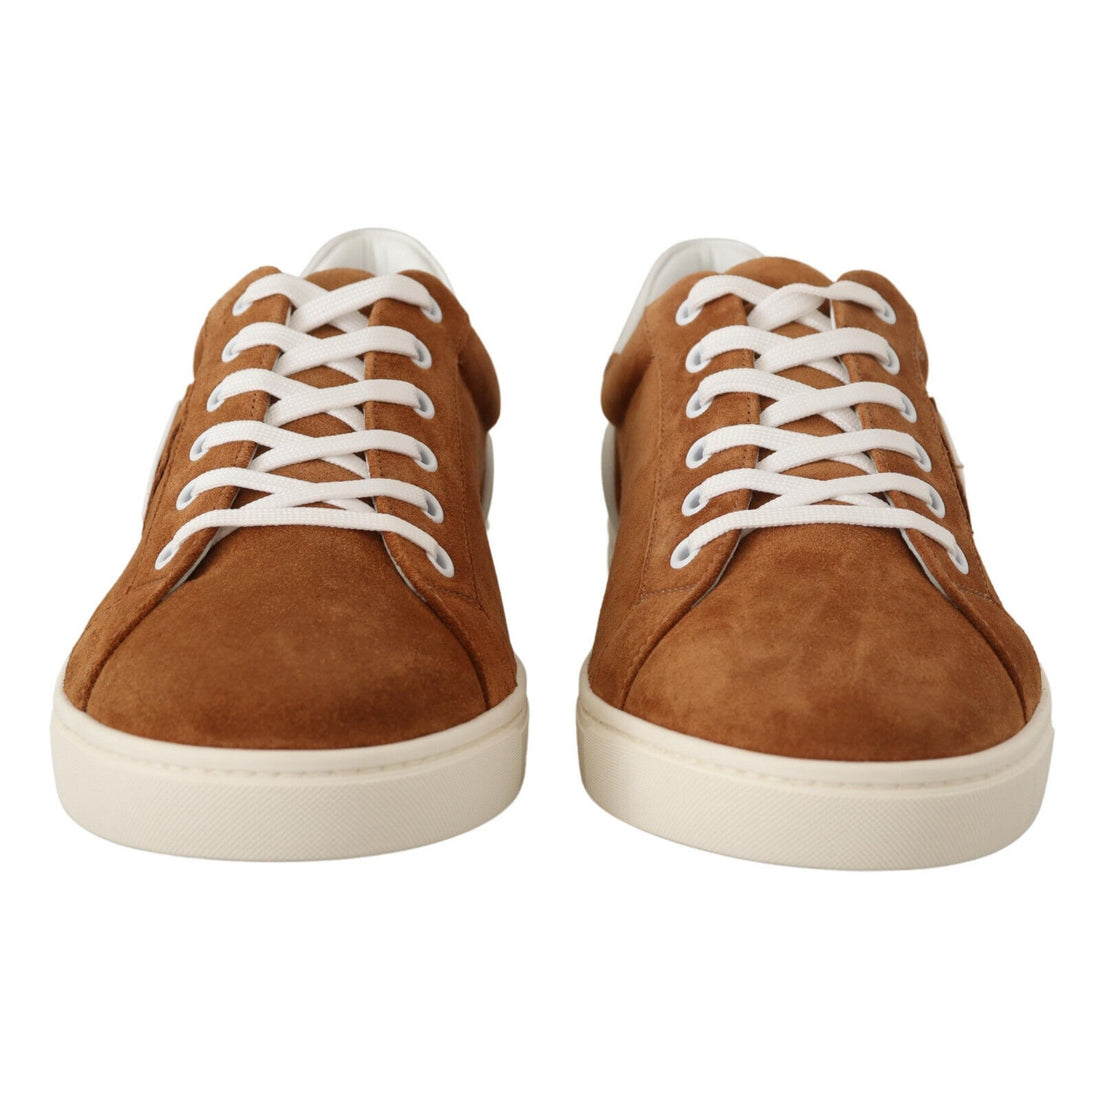 Dolce & Gabbana Elegant Two-Tone Leather Sneakers